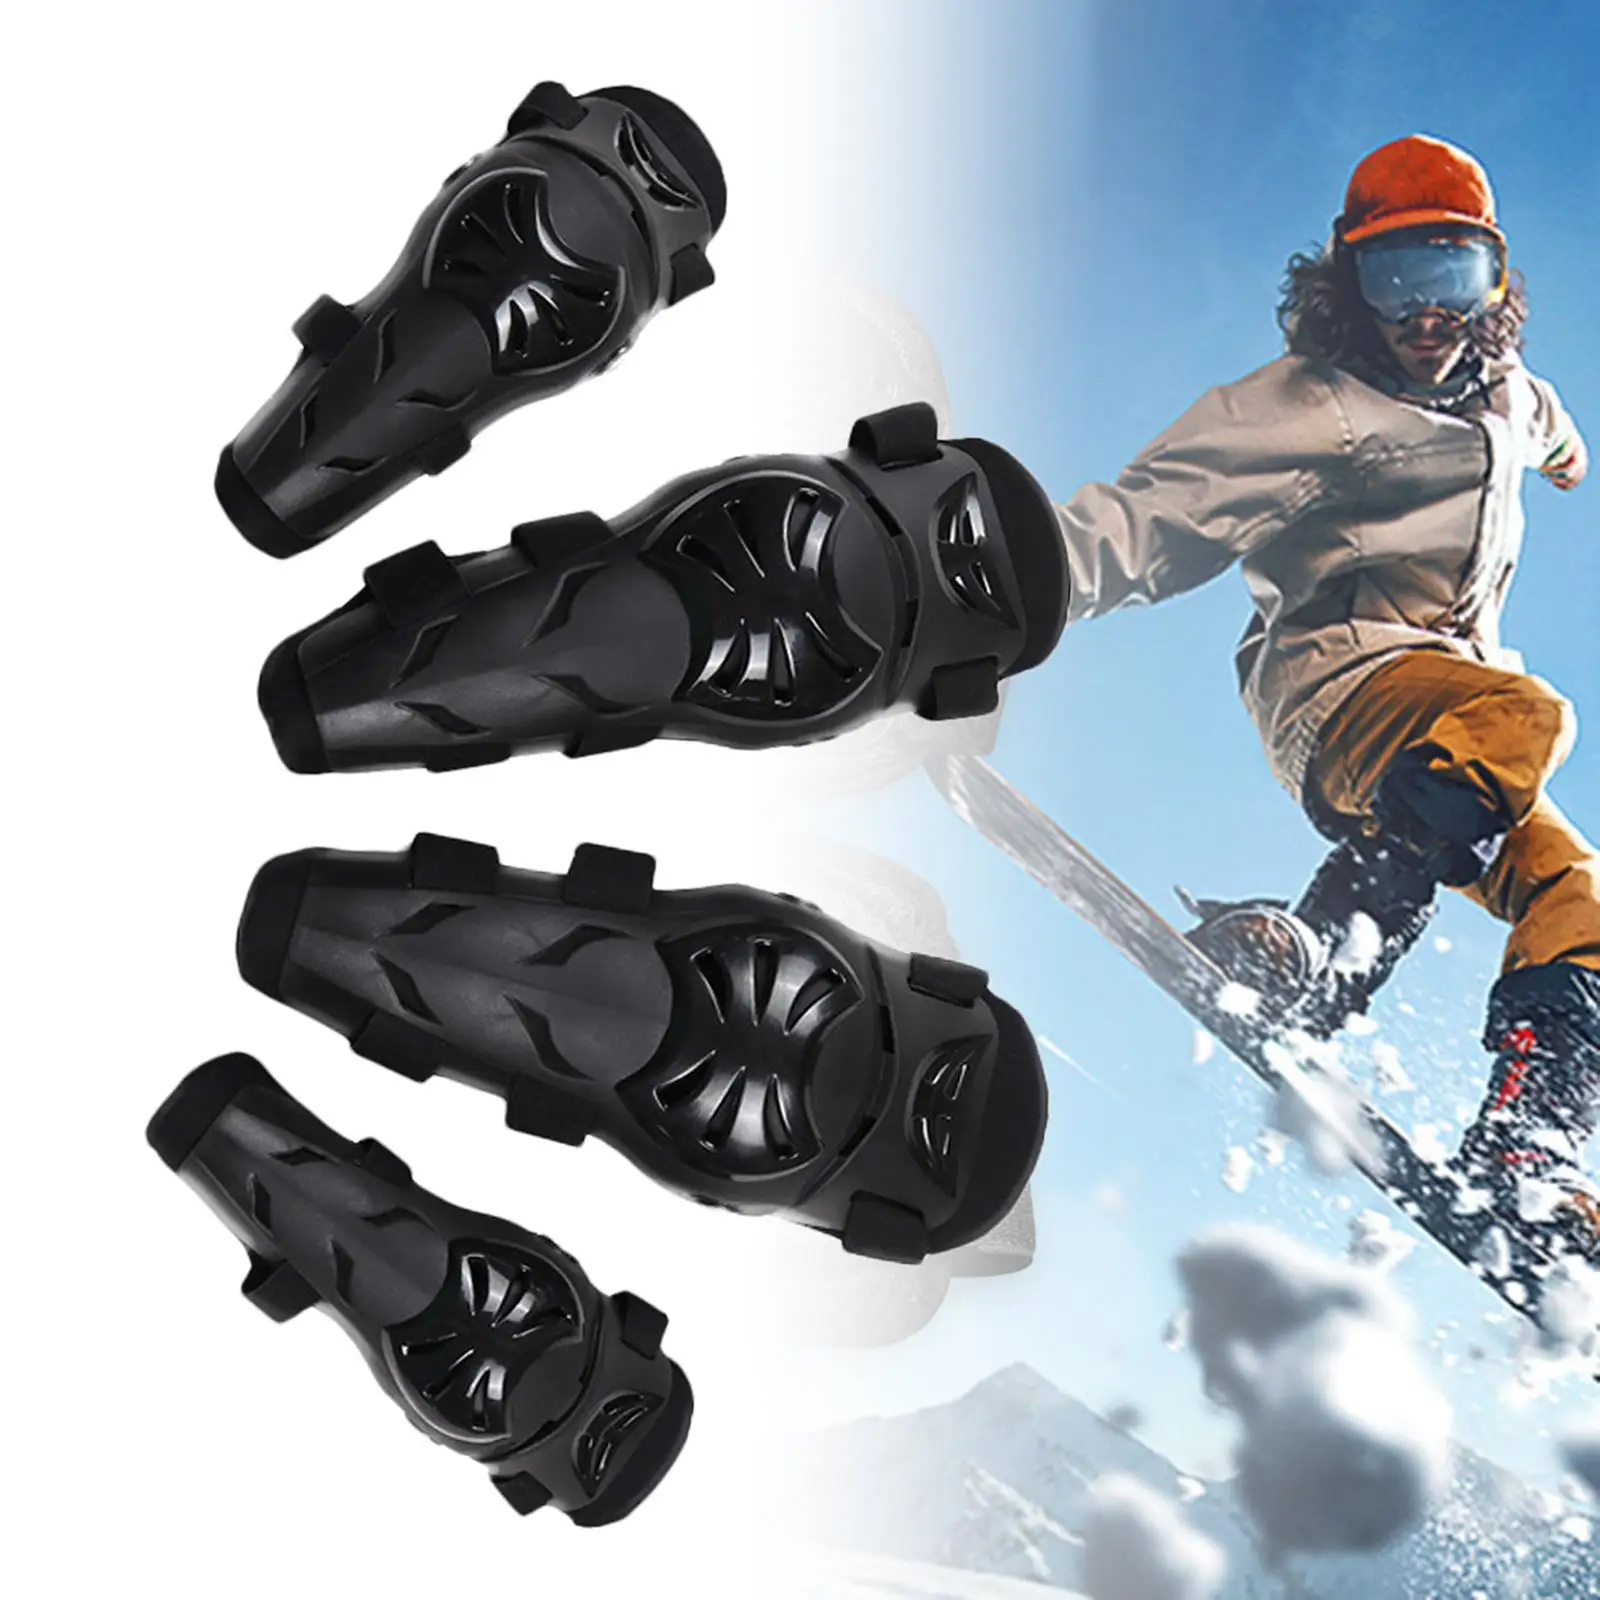 4 Pieces Motorcycle Knee Shin Guards for Skating Cycling Powersports